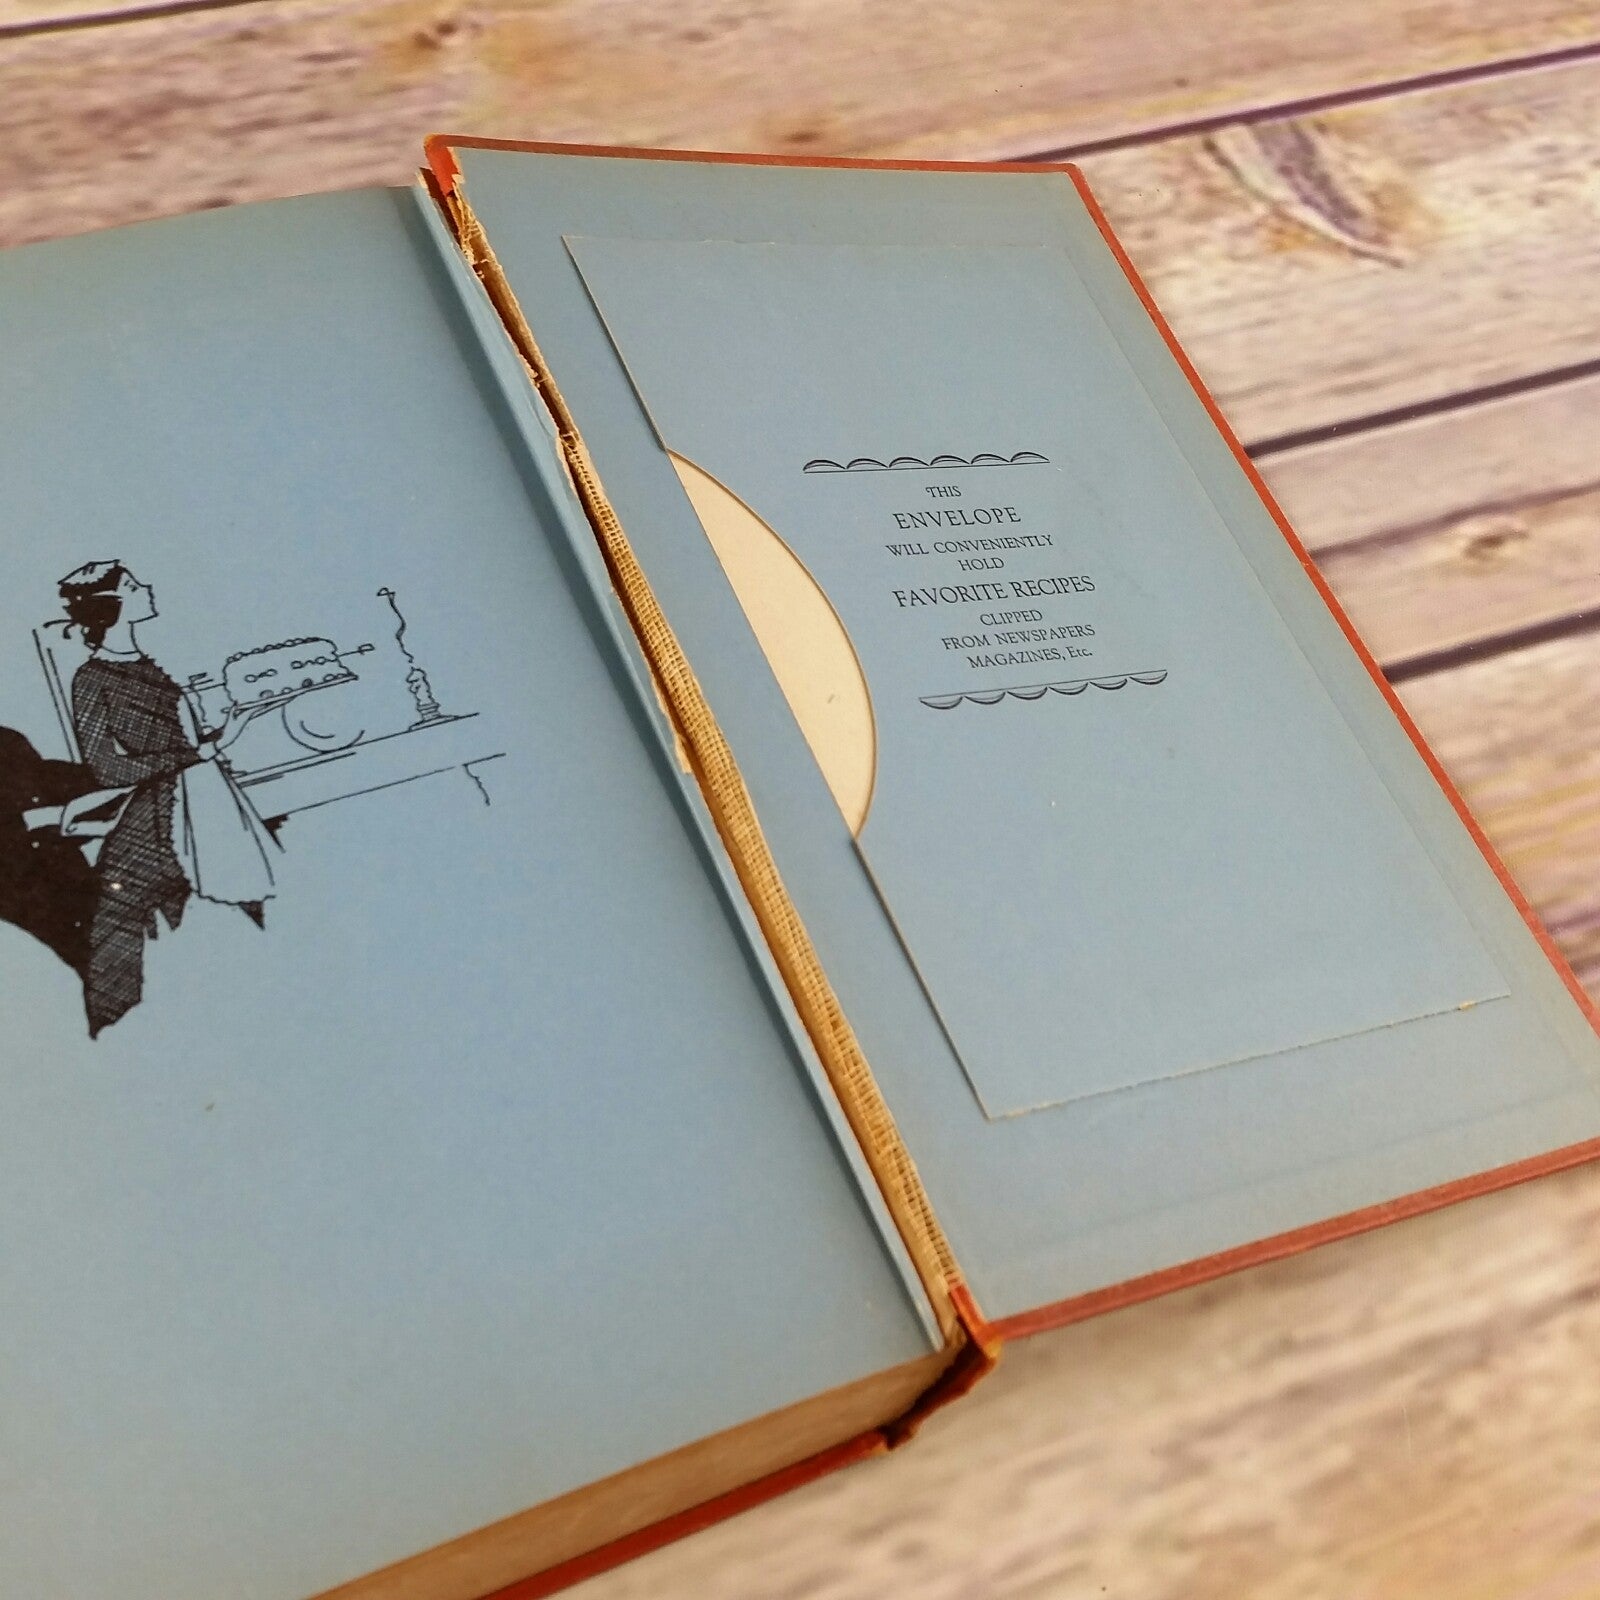 Vintage Cookbook Quality Cook Book Modern Cooking 1932 Hardcover No Dust Jacket Dorothy Fitzgerald - At Grandma's Table